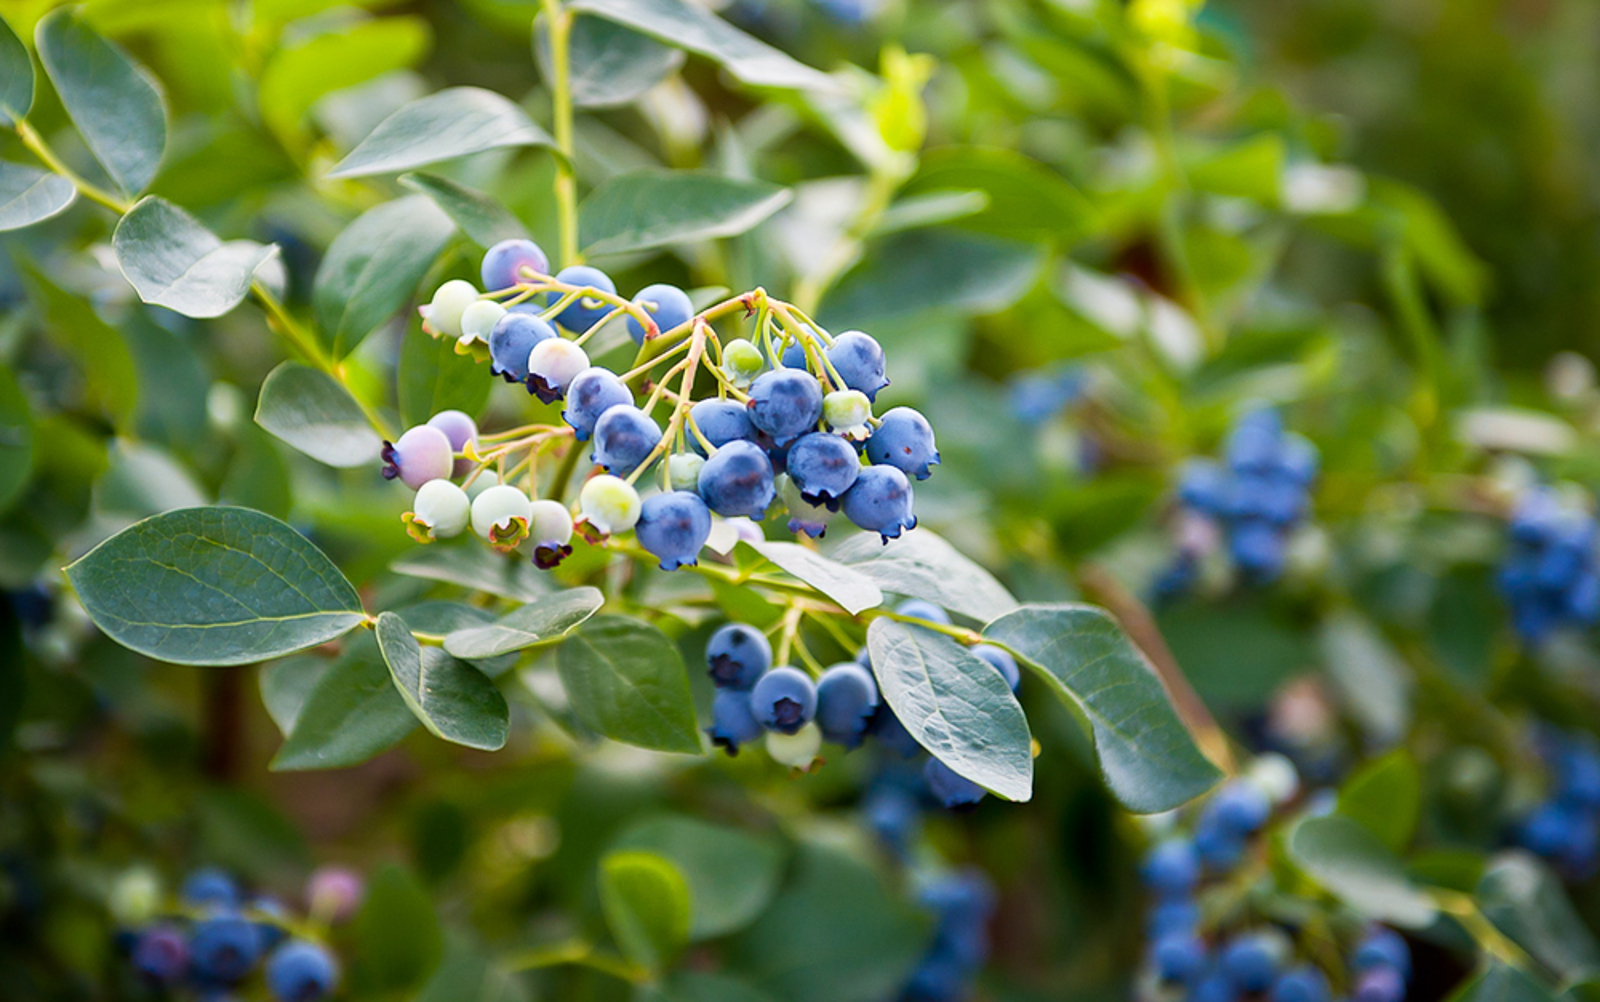 How to Grow Blueberries at Home